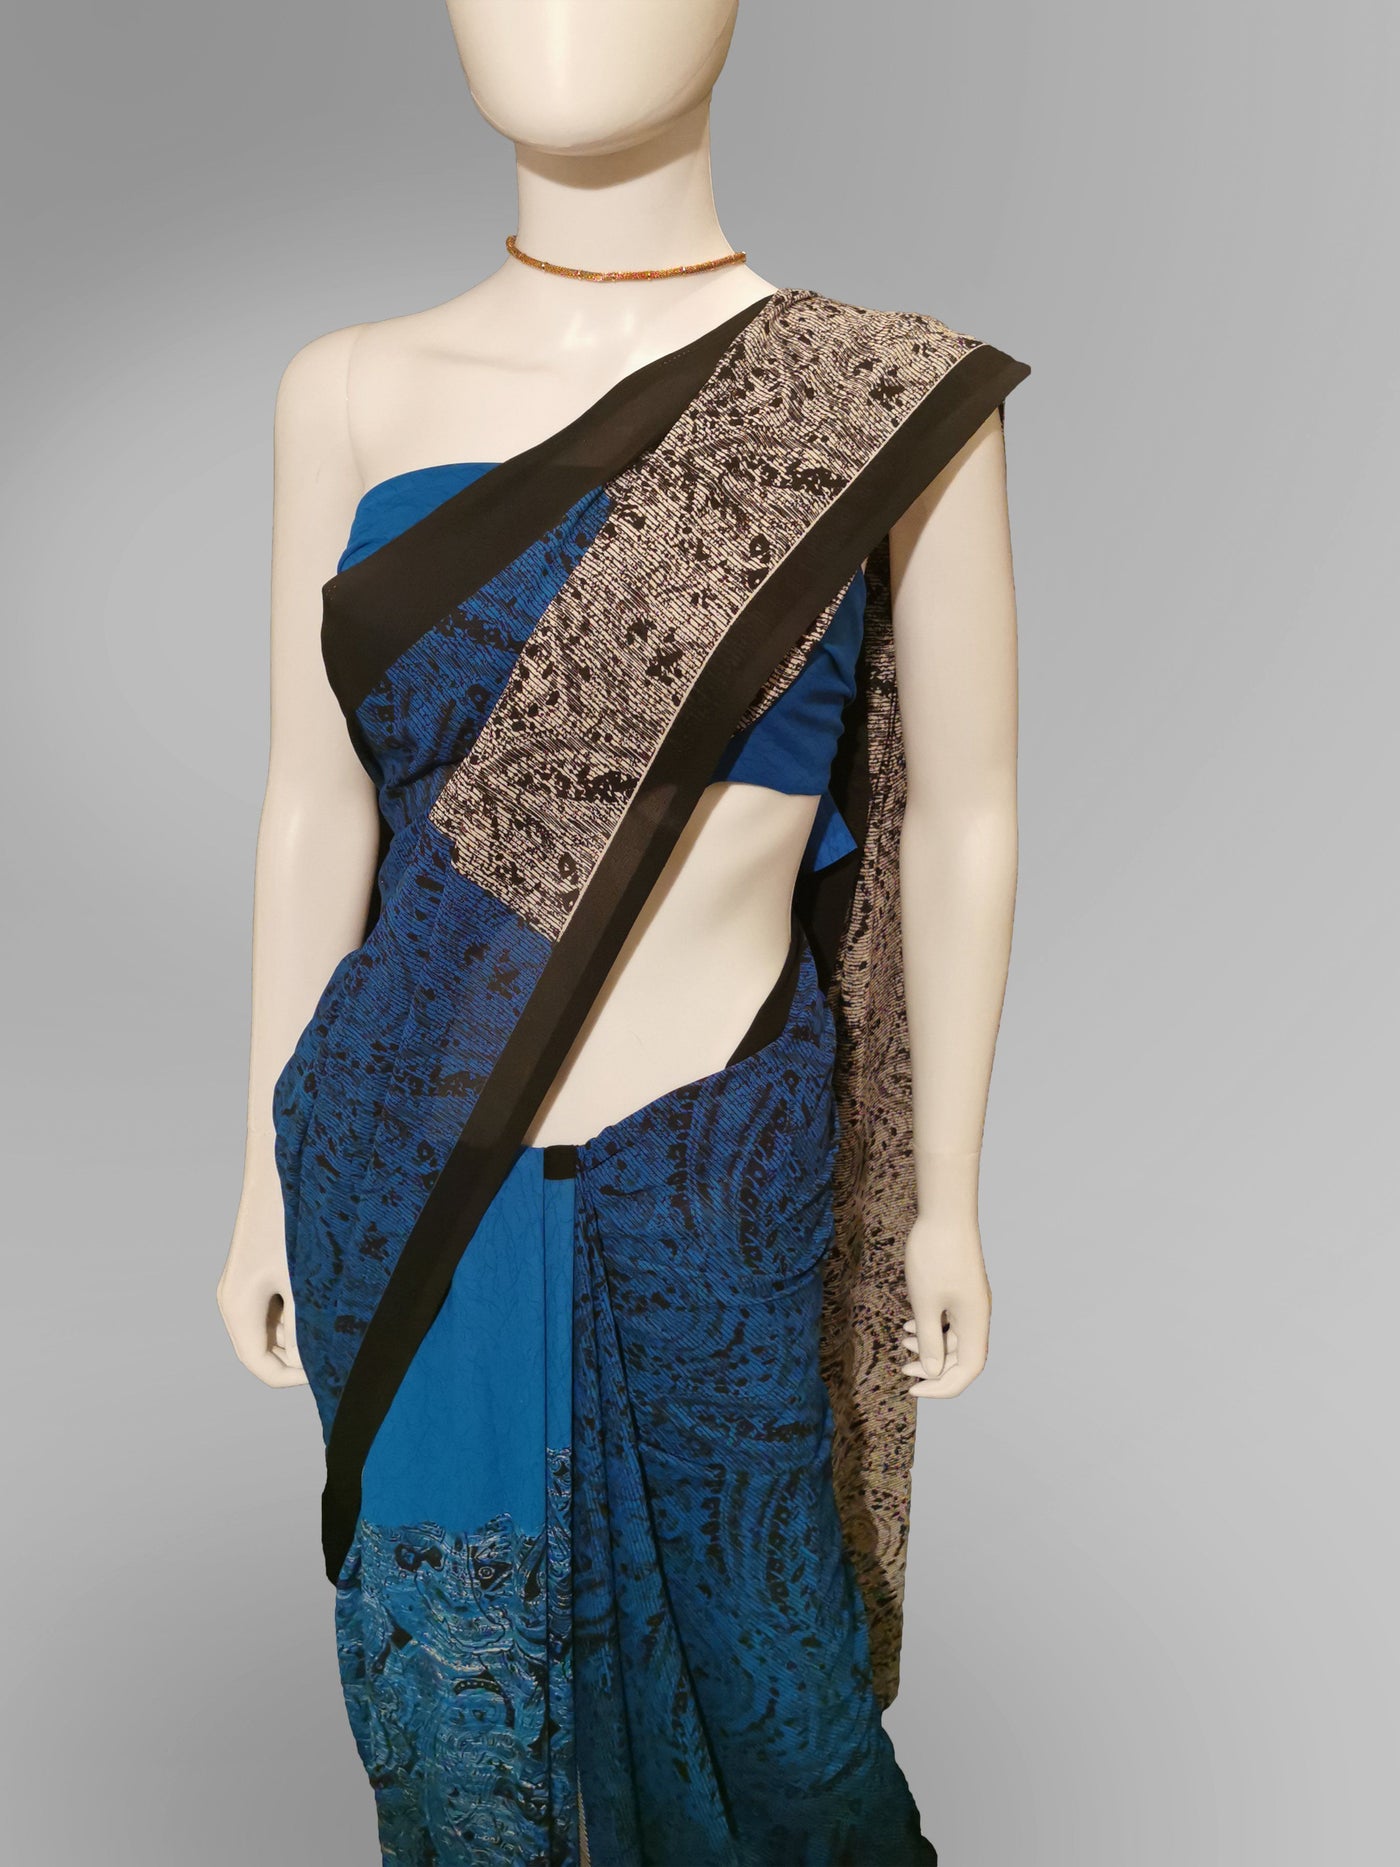 Saree in Blue Black and White with Block Print Work Indian Clothing in Denver, CO, Aurora, CO, Boulder, CO, Fort Collins, CO, Colorado Springs, CO, Parker, CO, Highlands Ranch, CO, Cherry Creek, CO, Centennial, CO, and Longmont, CO. NATIONWIDE SHIPPING USA- India Fashion X